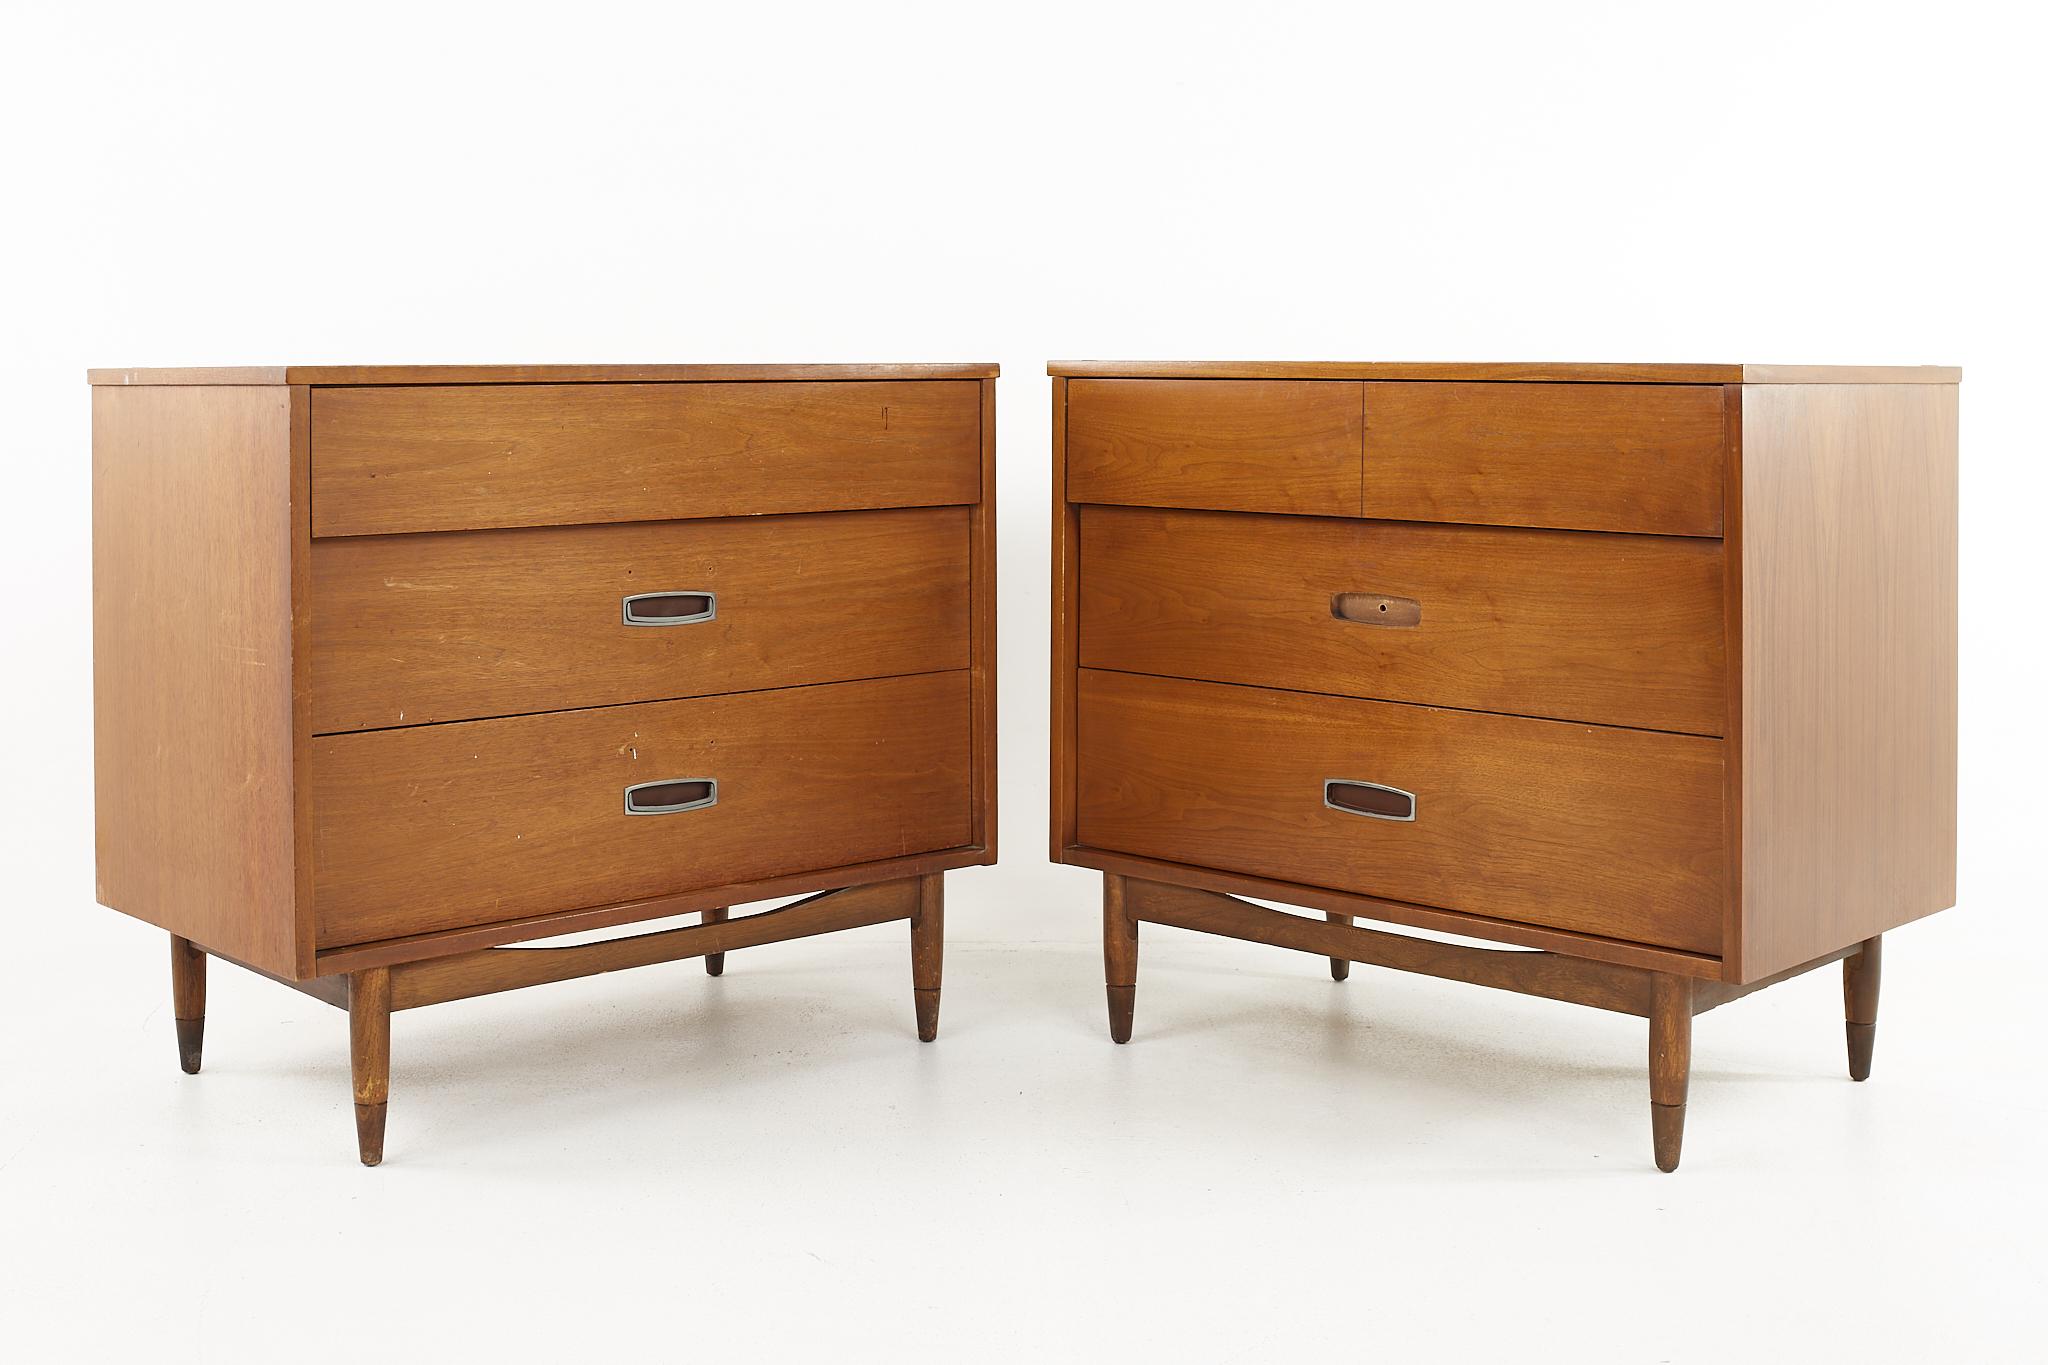 Mainline by Hooker mid century walnut 36 inch chest - a pair

Each chest measures: 36 wide x 20 deep x 32 inches high

All pieces of furniture can be had in what we call restored vintage condition. That means the piece is restored upon purchase